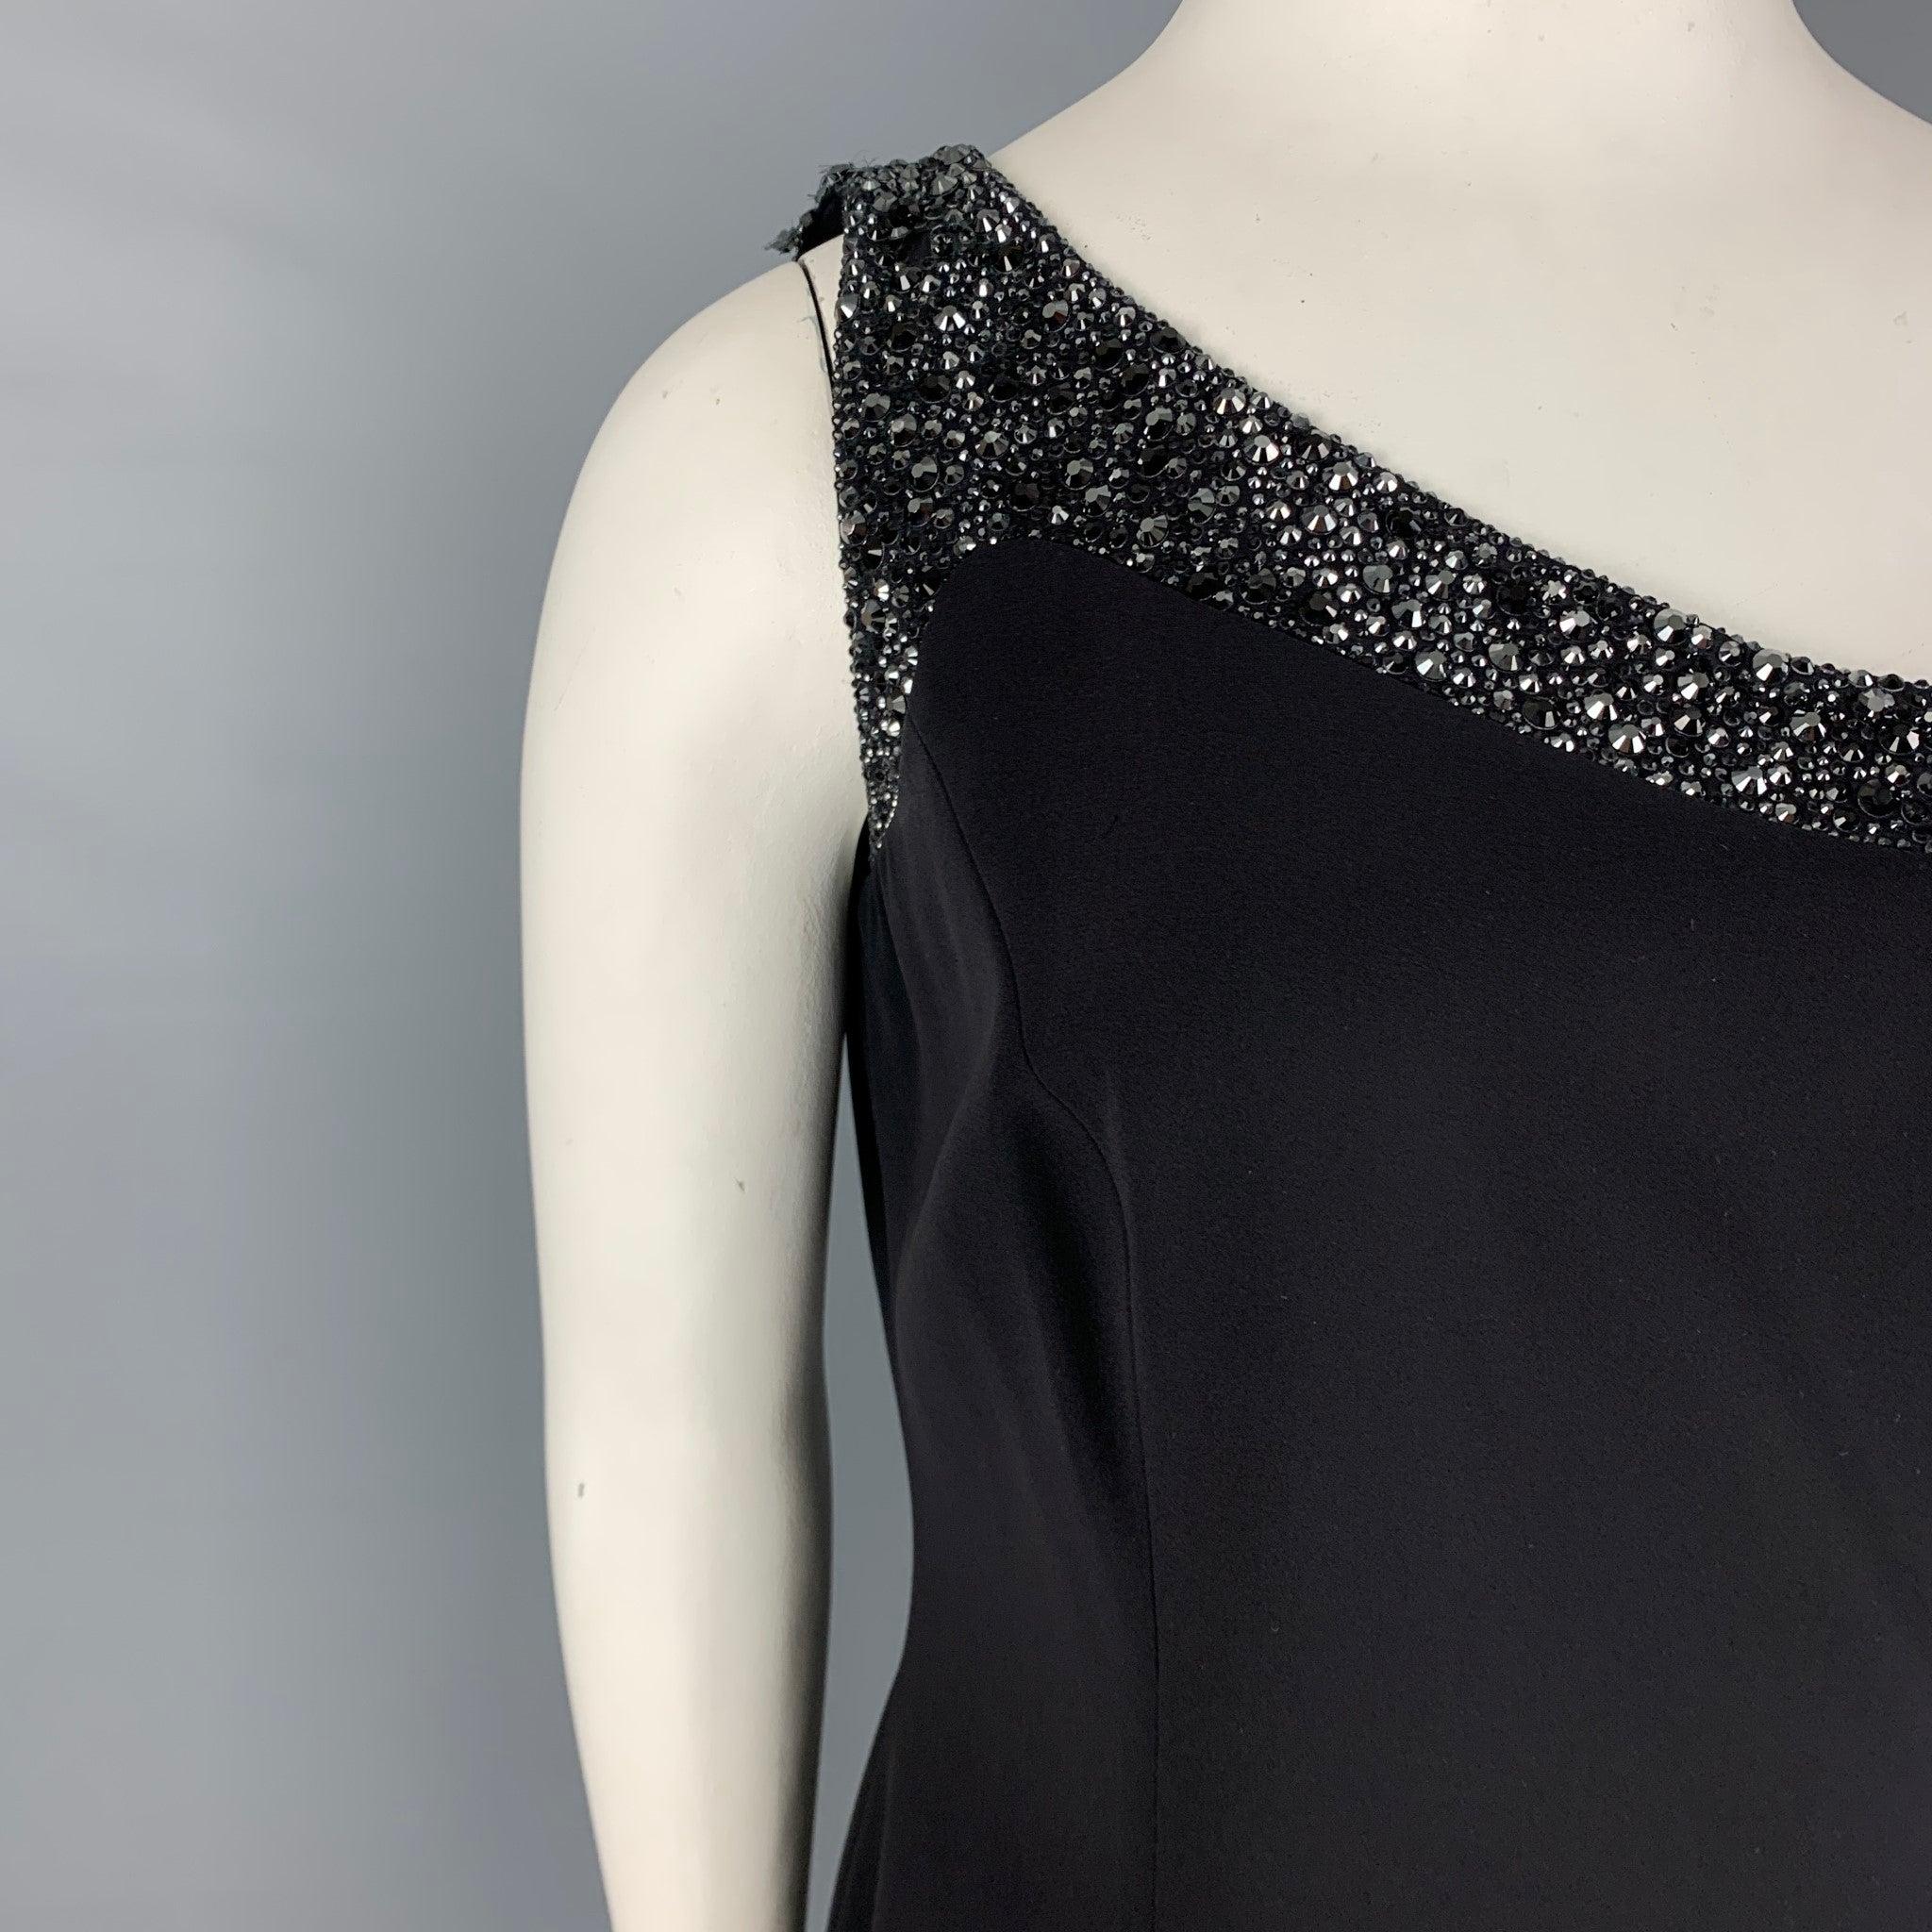 GIORGIO ARMANI dress comes in a black material featuring a rhinestone trim design, wrap style, slit pockets, and a side zipper closure. Made in Italy.
Very Good Pre-Owned Condition. Moderate wear at shoulder. As-is.  

Marked:   48 

Measurements: 
